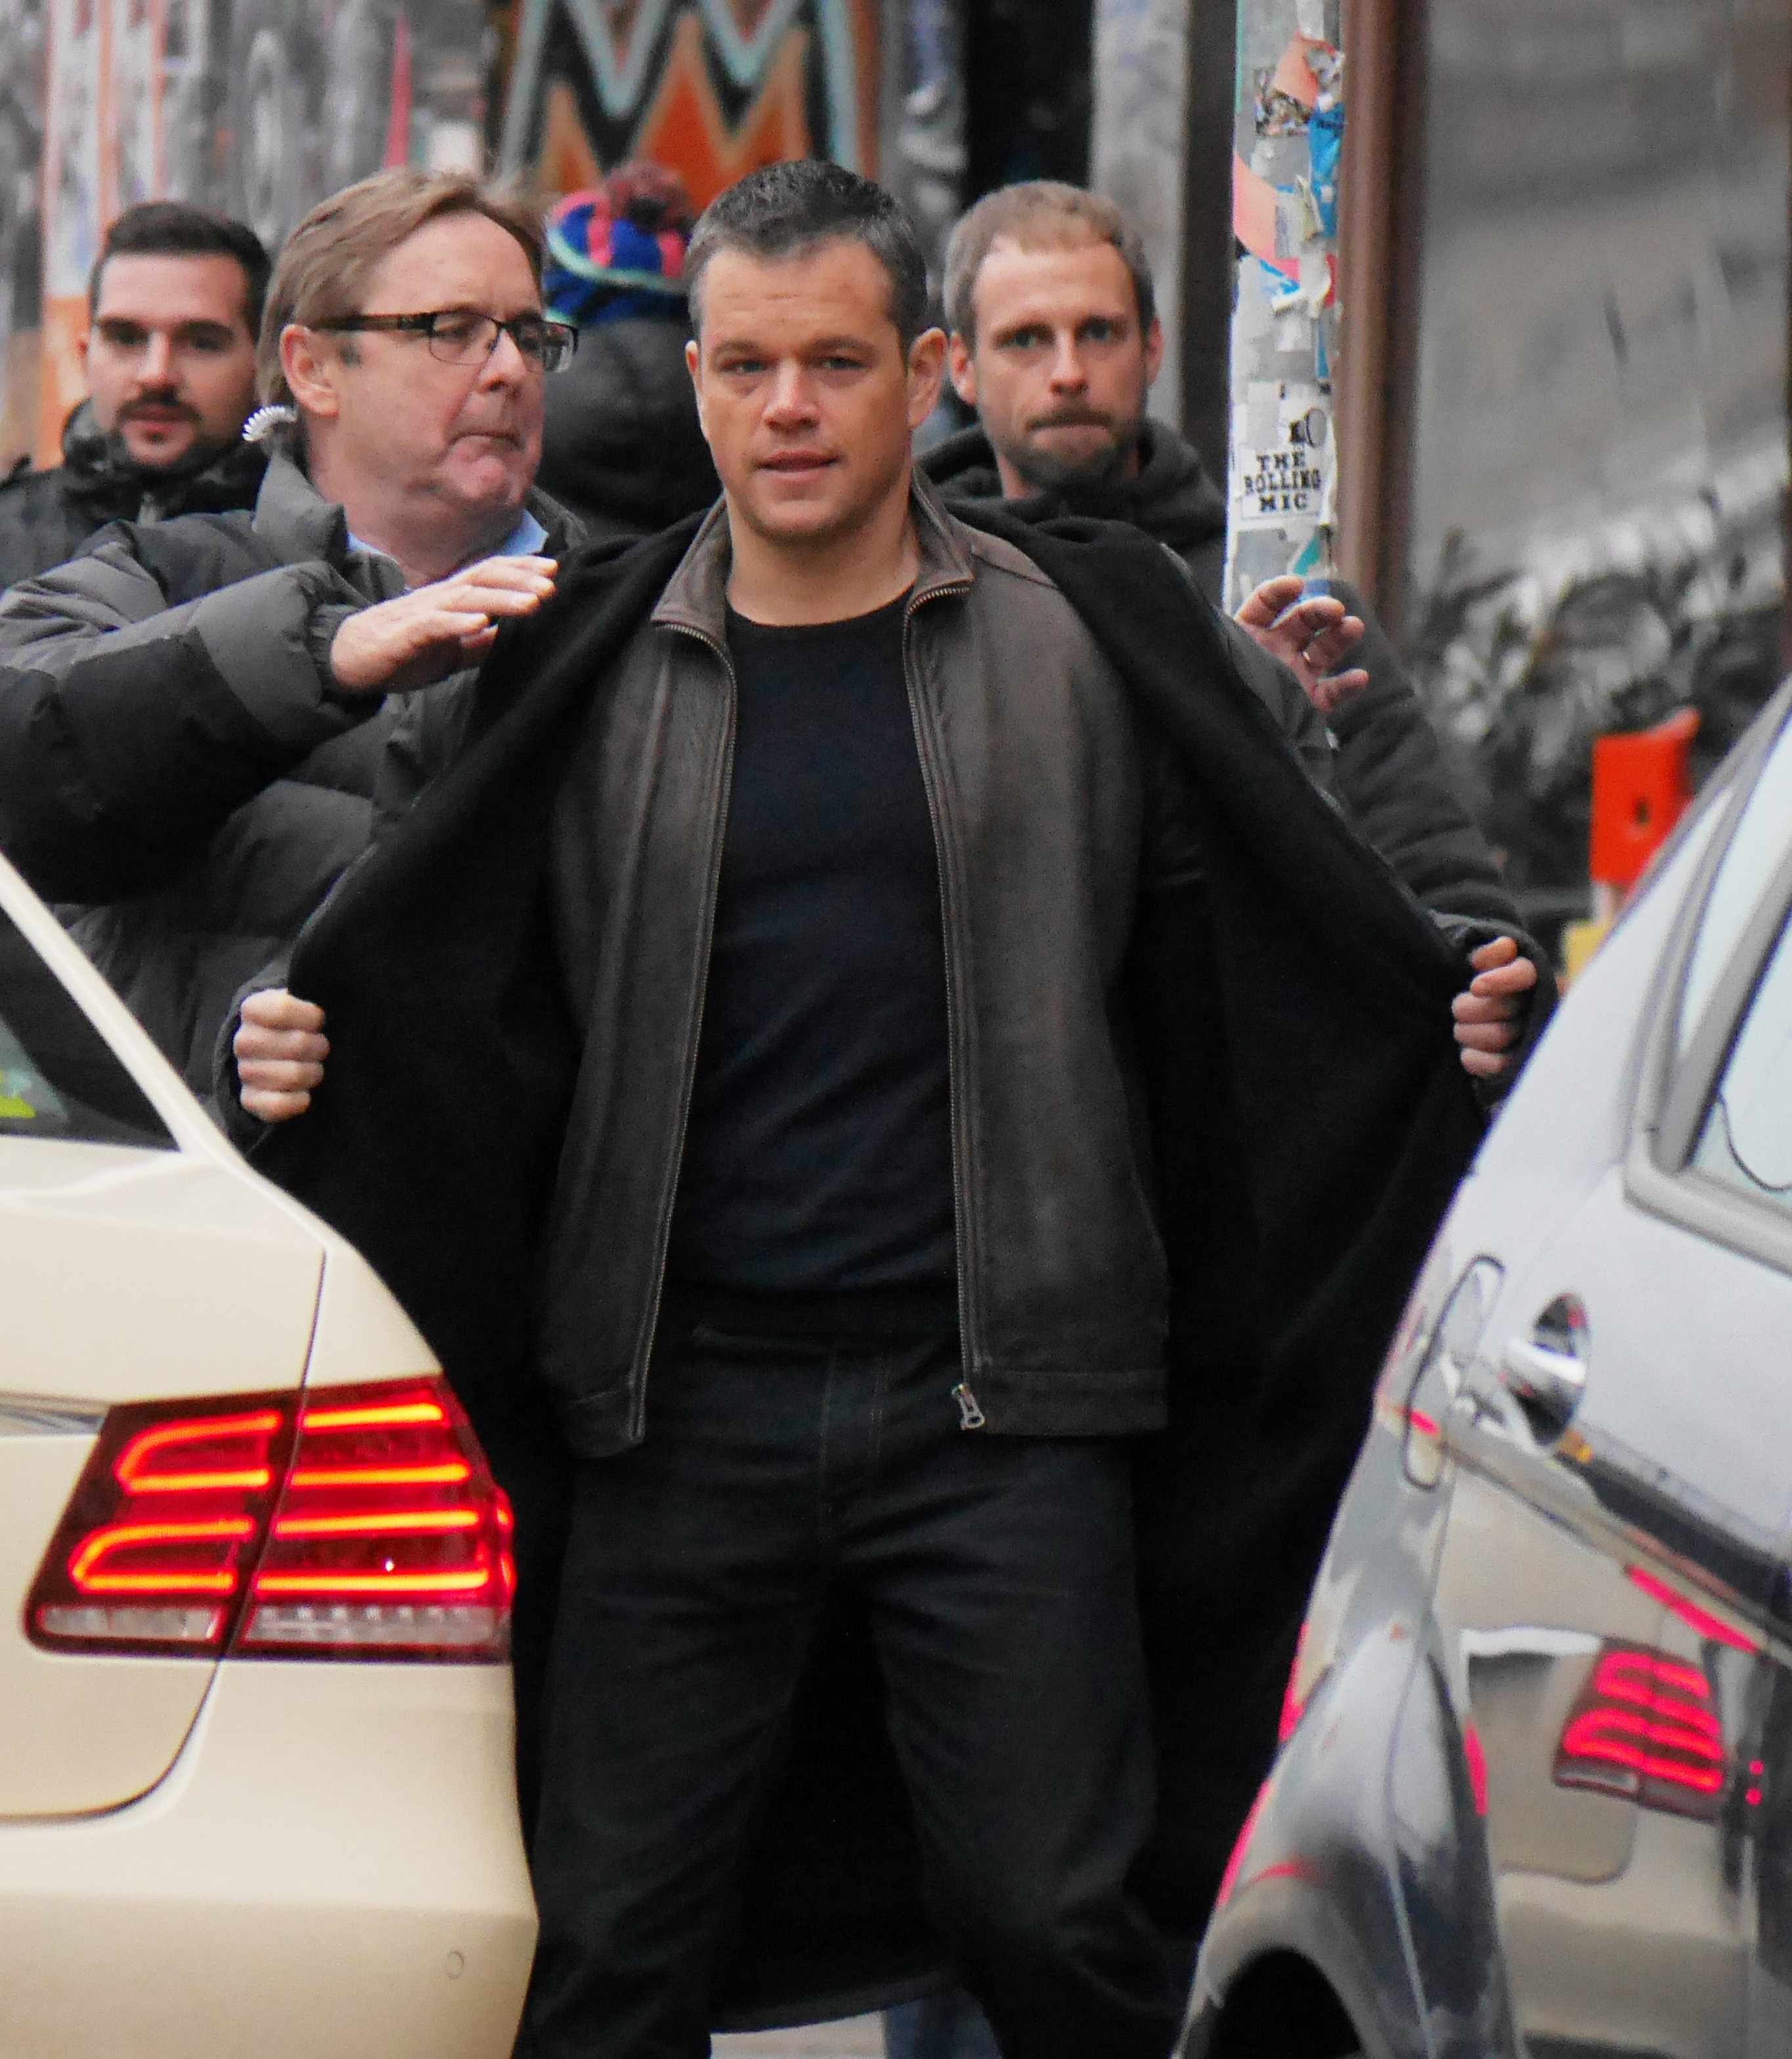 Matt Damon sighted during the filming of the fifth "Bourne Identity" sequel on November 25, 2015, in Berlin, Germany. | Source: Getty Images